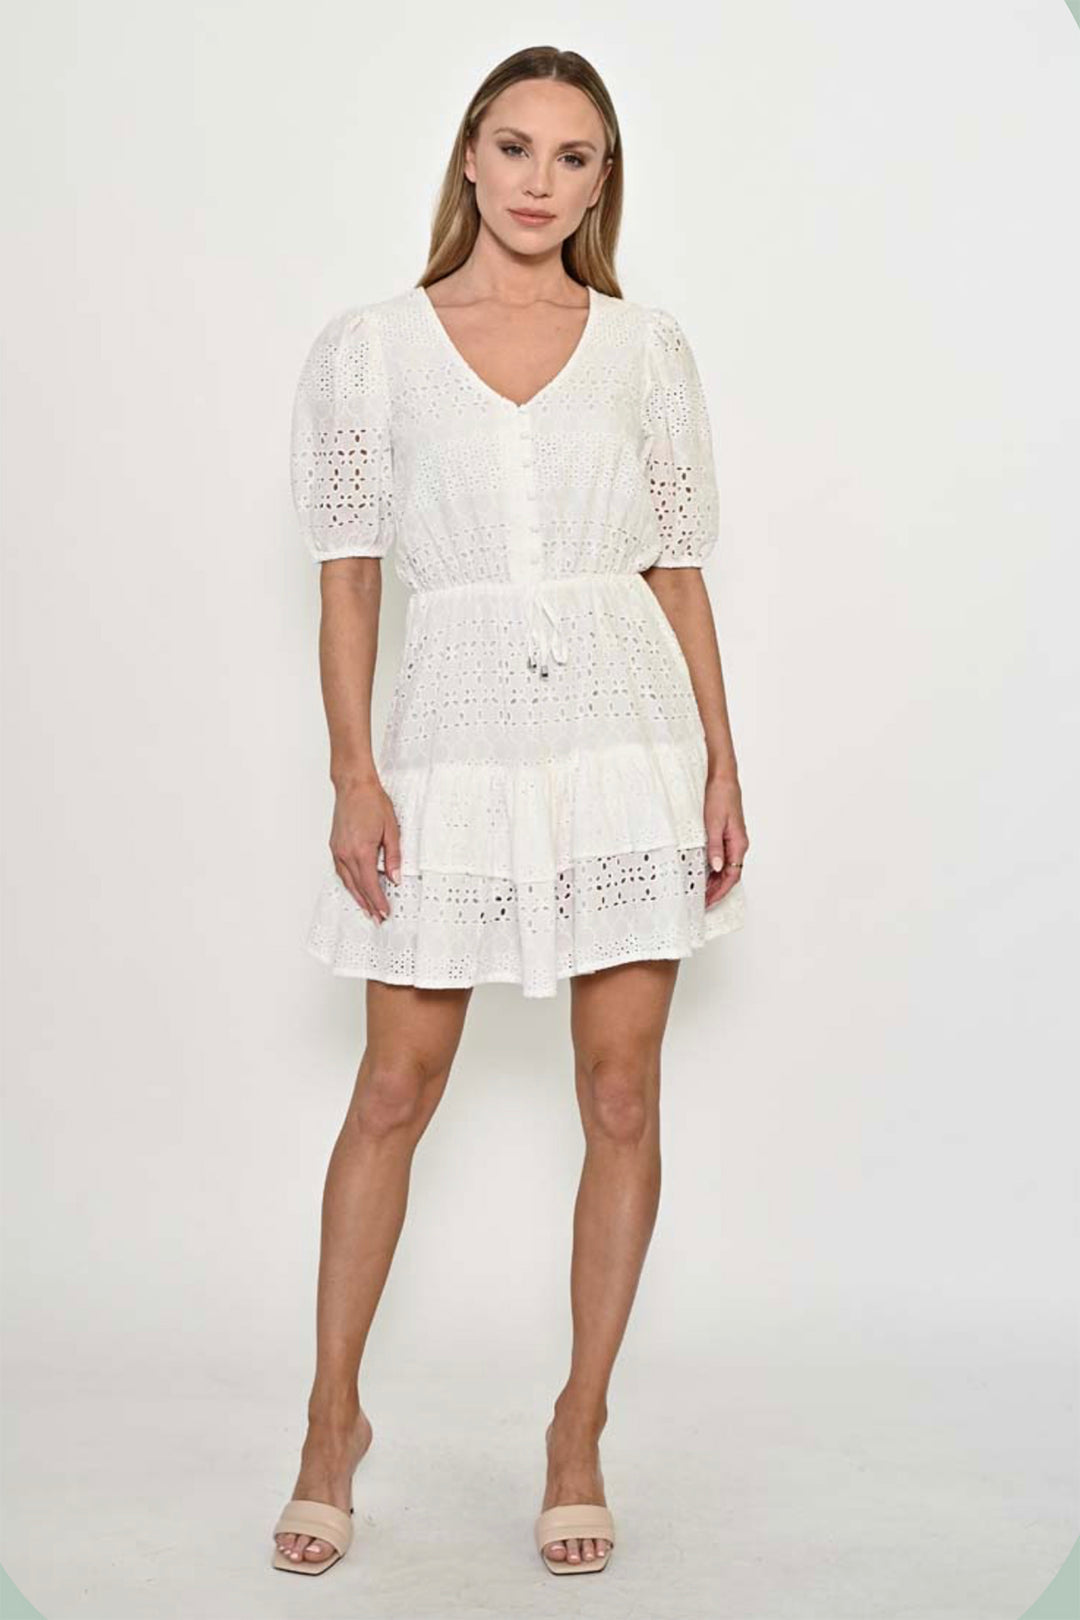 Woman wearing the Ayra white dress by New Look, sold and shipped from Pizazz Boutique Nelson Bay women's dresses online Australia